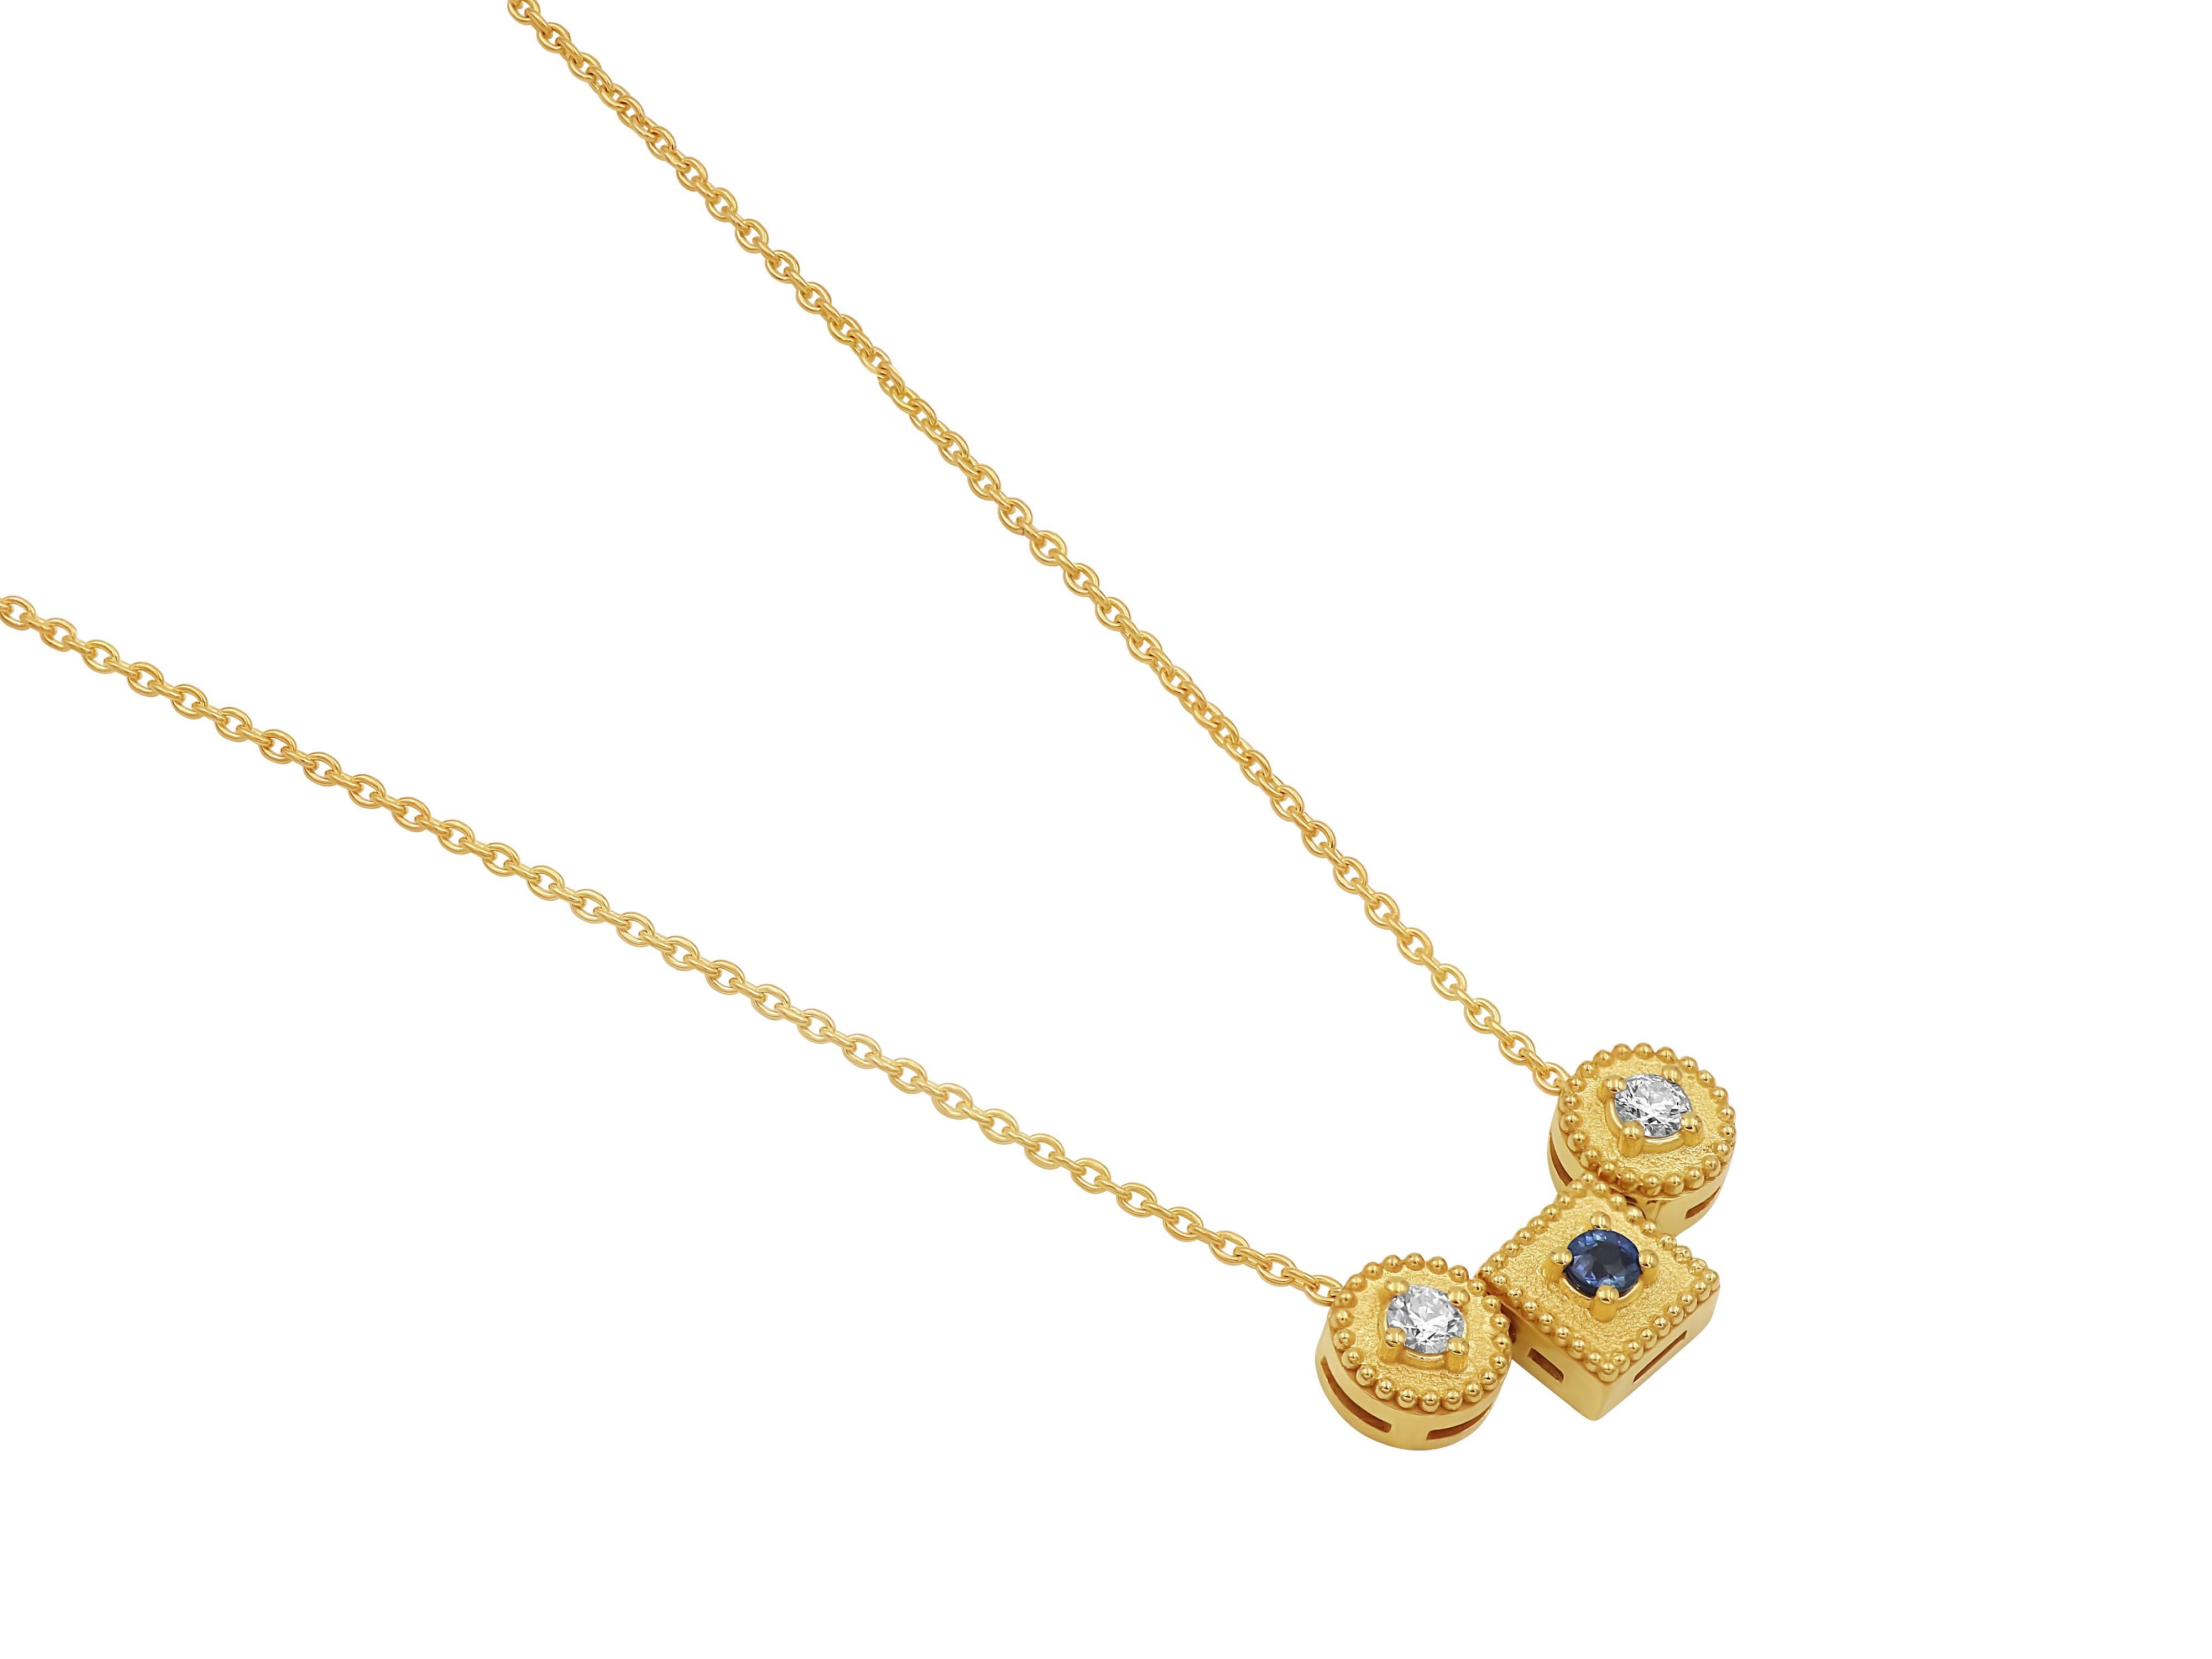 Solid 18k gold Balance necklace set with white brilliant cut natural diamonds and sapphire chosen very carefully for its excellent cut. Elegant and luxurious, perfect for special occasions or as a statement piece.